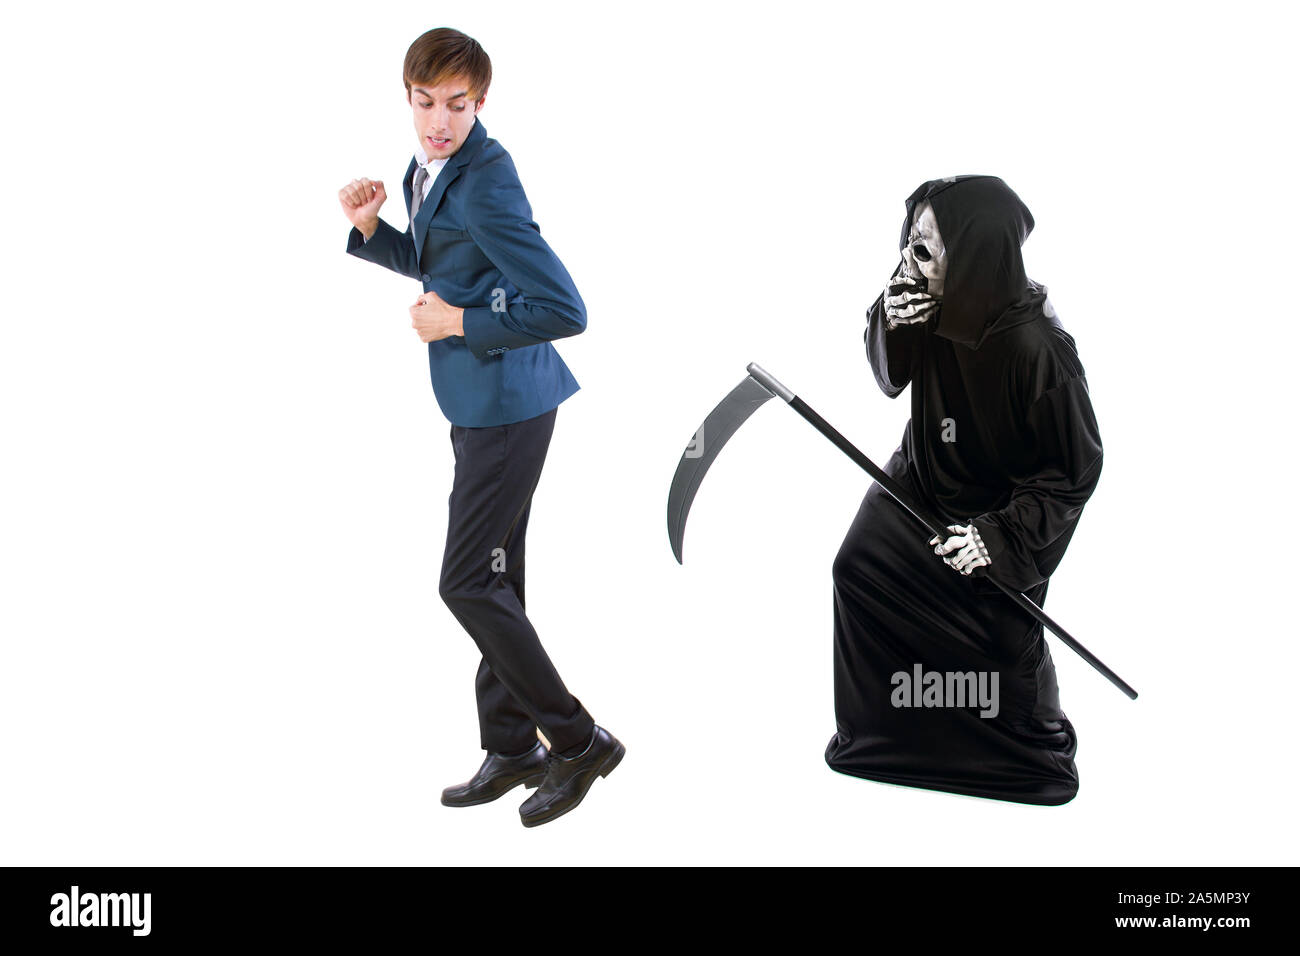 Man in a Halloween grim reaper ghost costume chasing, mocking and making fun of scared businessman running away.  Can also depict death following a ma Stock Photo